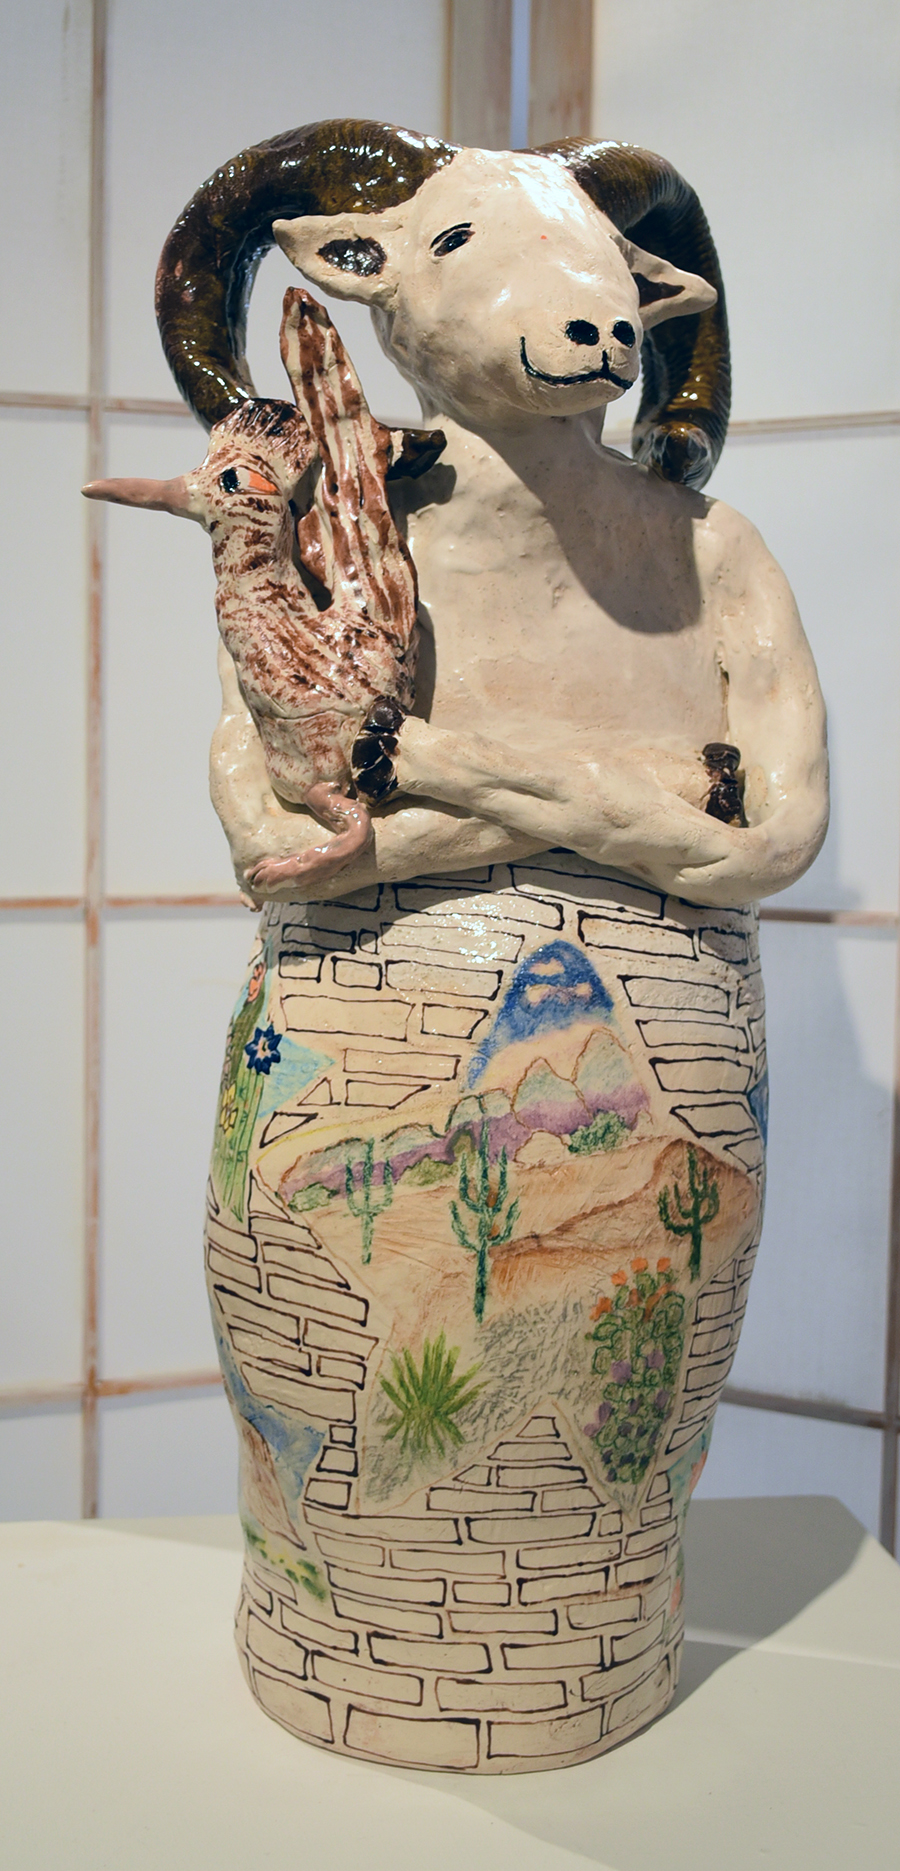 Kate Missett Big Horned Sheep and Road Runner Versus the Wall 2017-18 White Stoneware 24 x 8 x 6 inches $850, low res.jpg